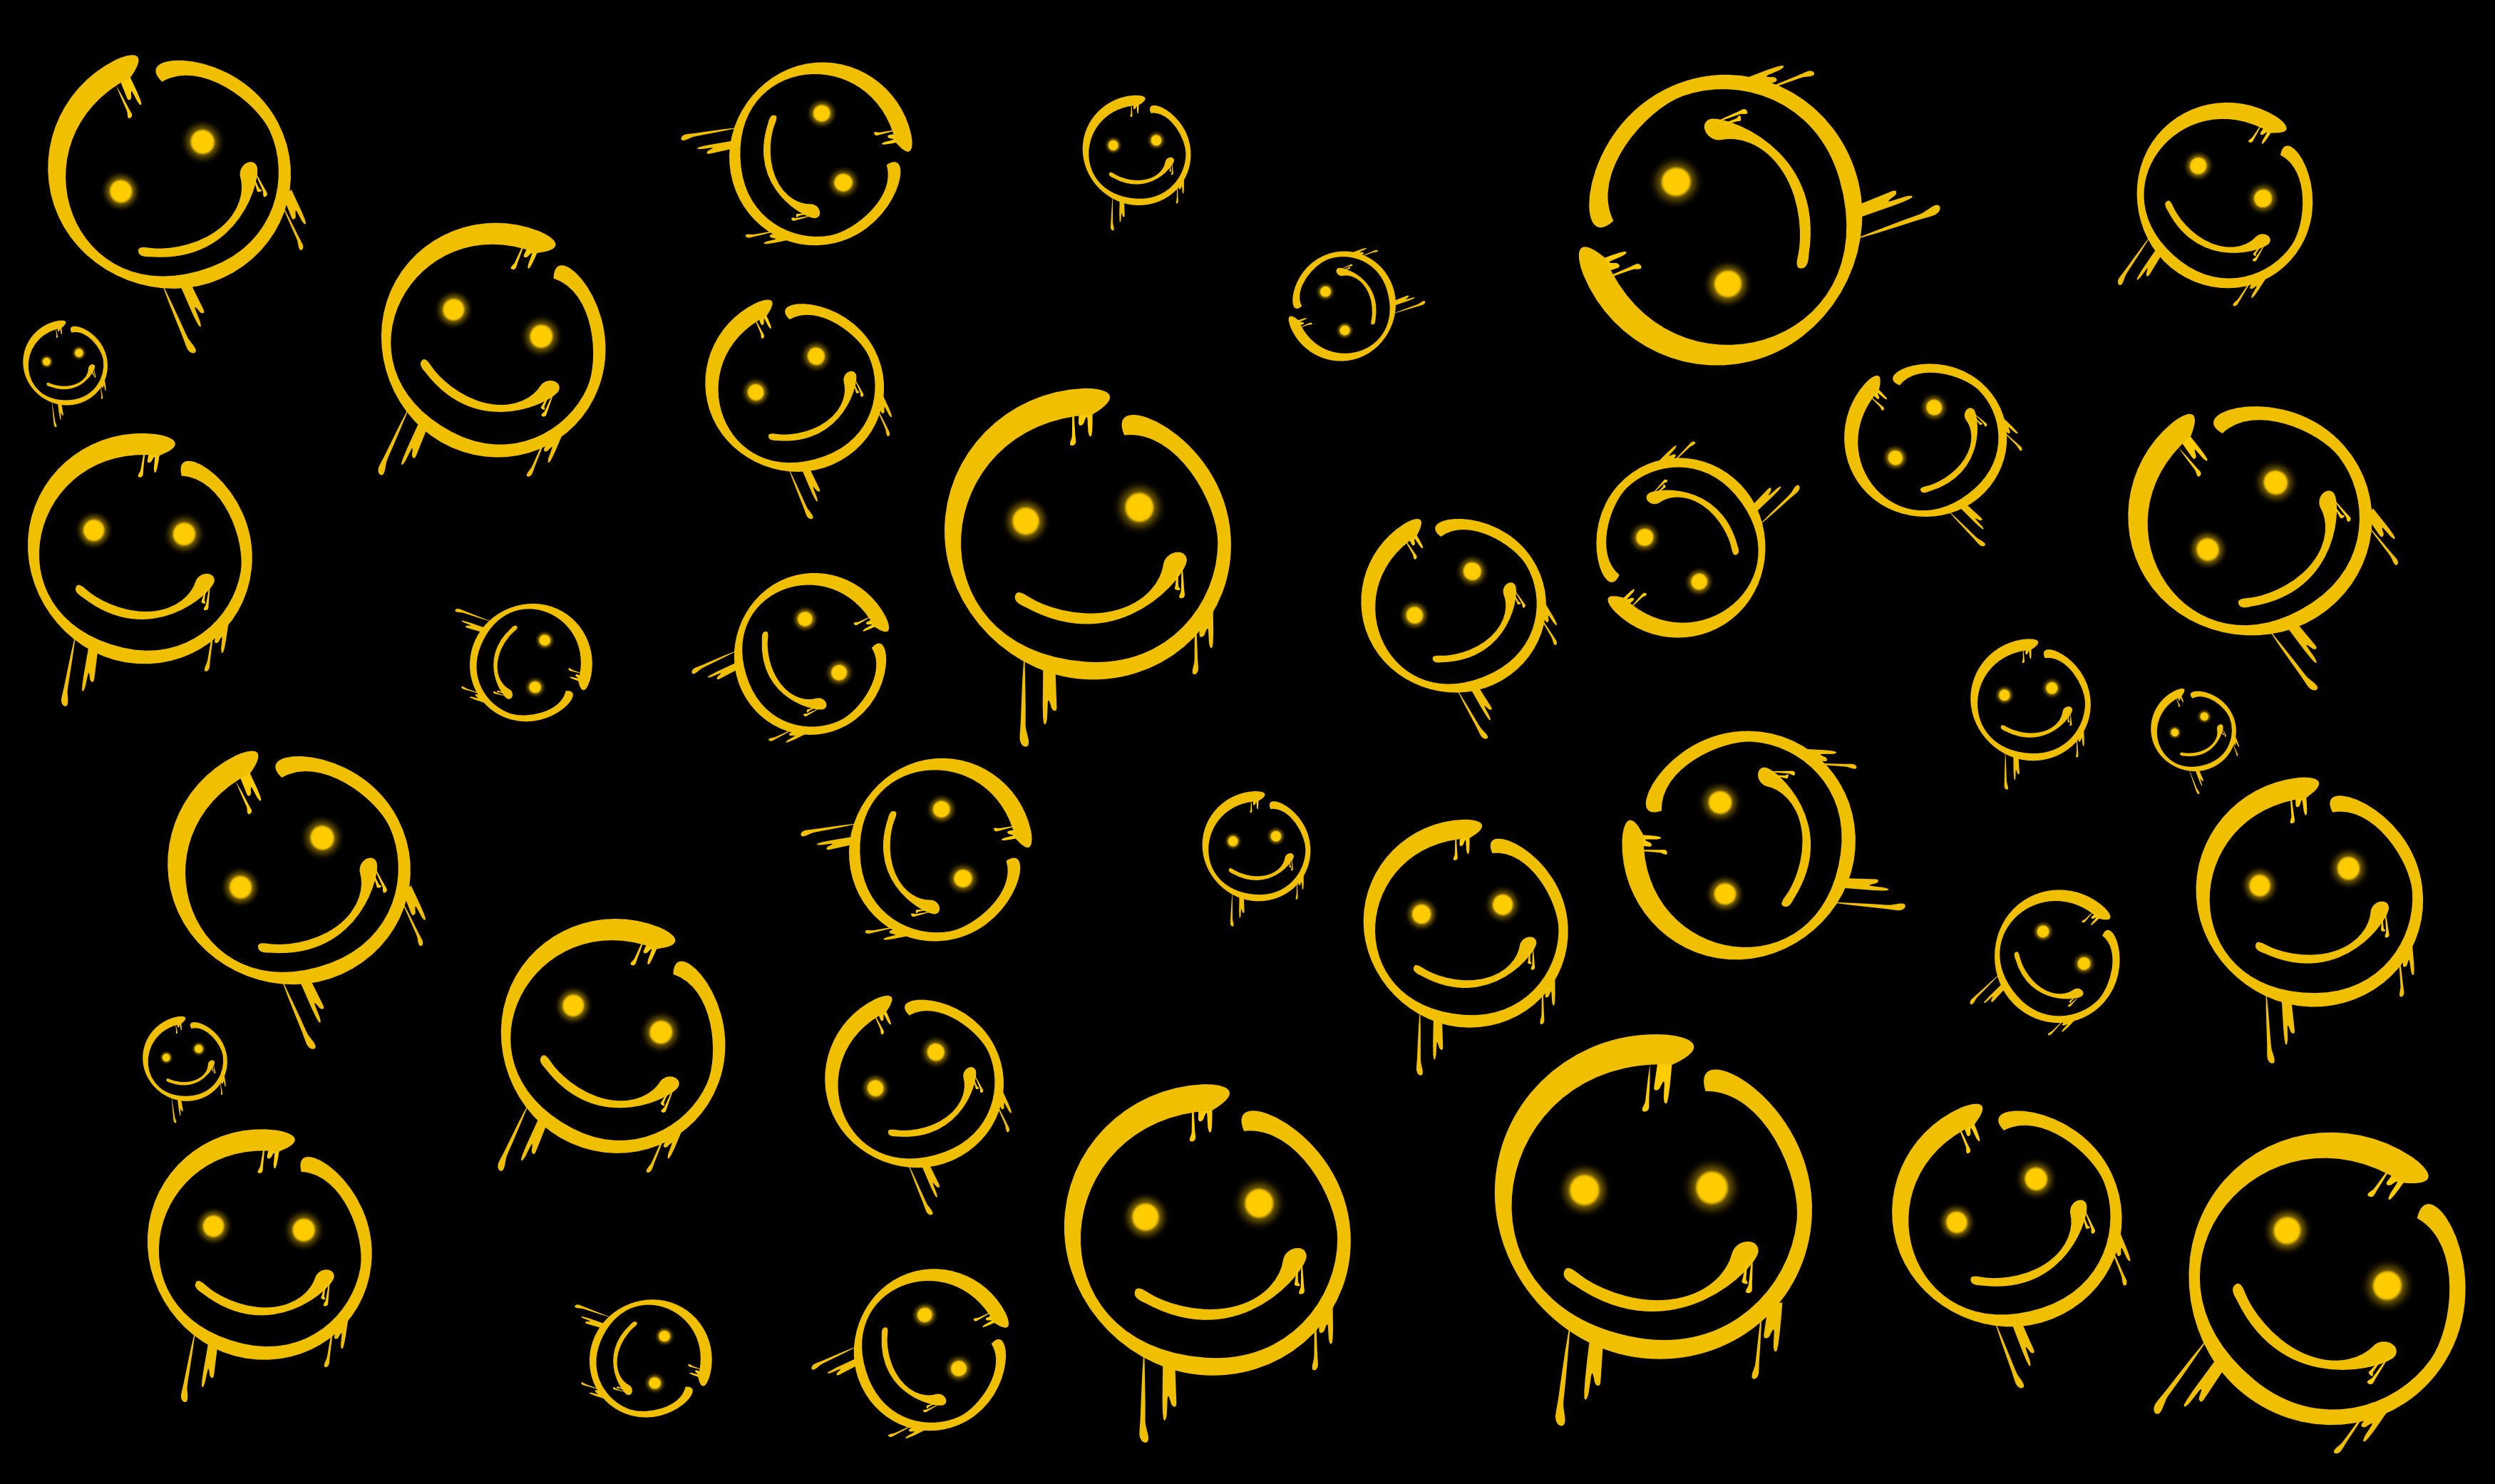 Trippy Smiley Face Wallpaper Gifts  Merchandise for Sale  Redbubble